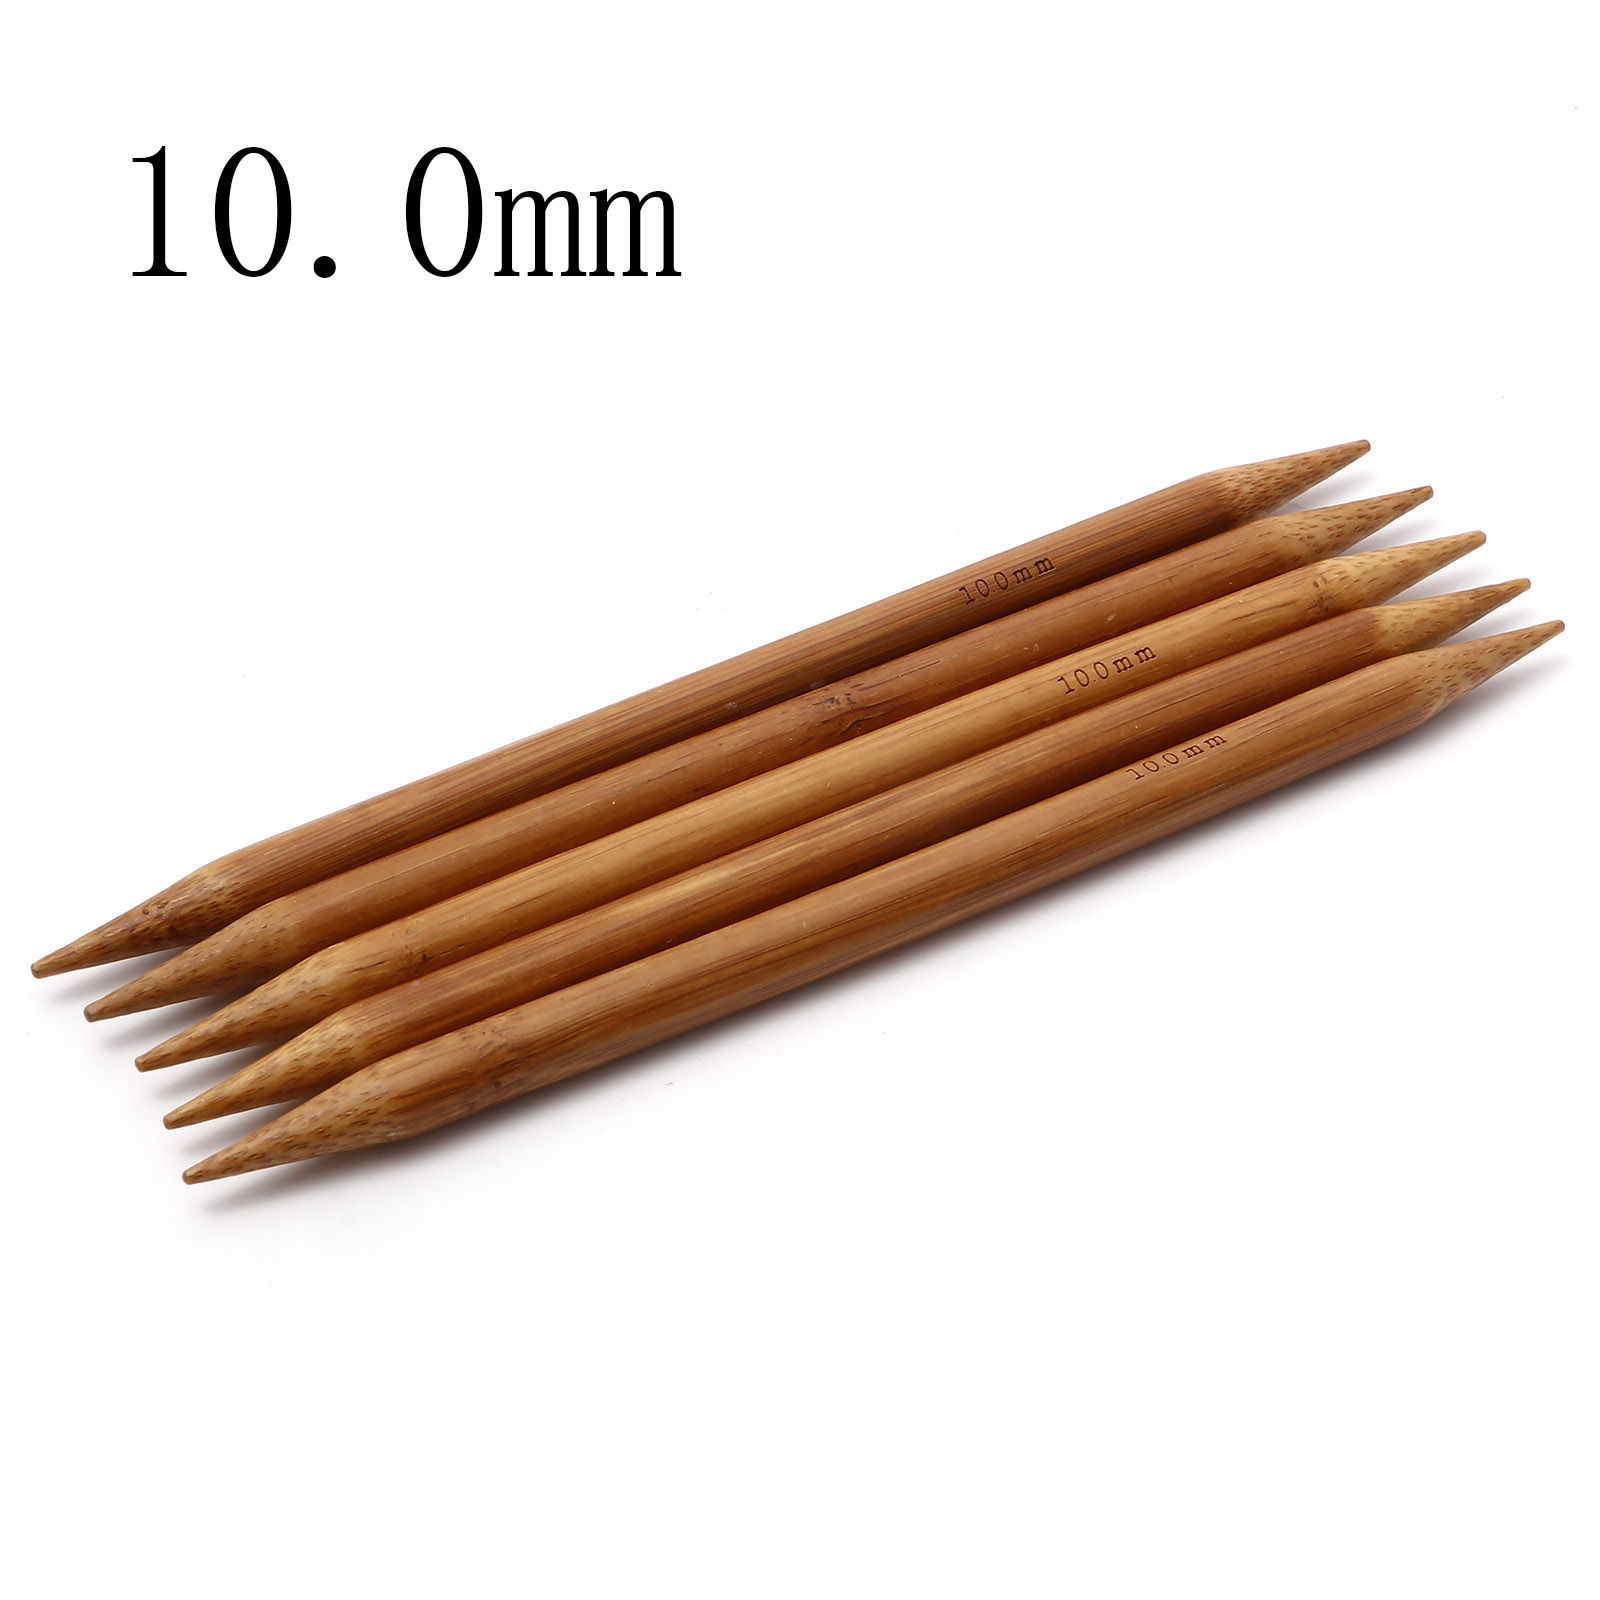 Picture of (US15 10.0mm) Bamboo Double Pointed Knitting Needles Brown 20cm(7 7/8") long, 5 PCs